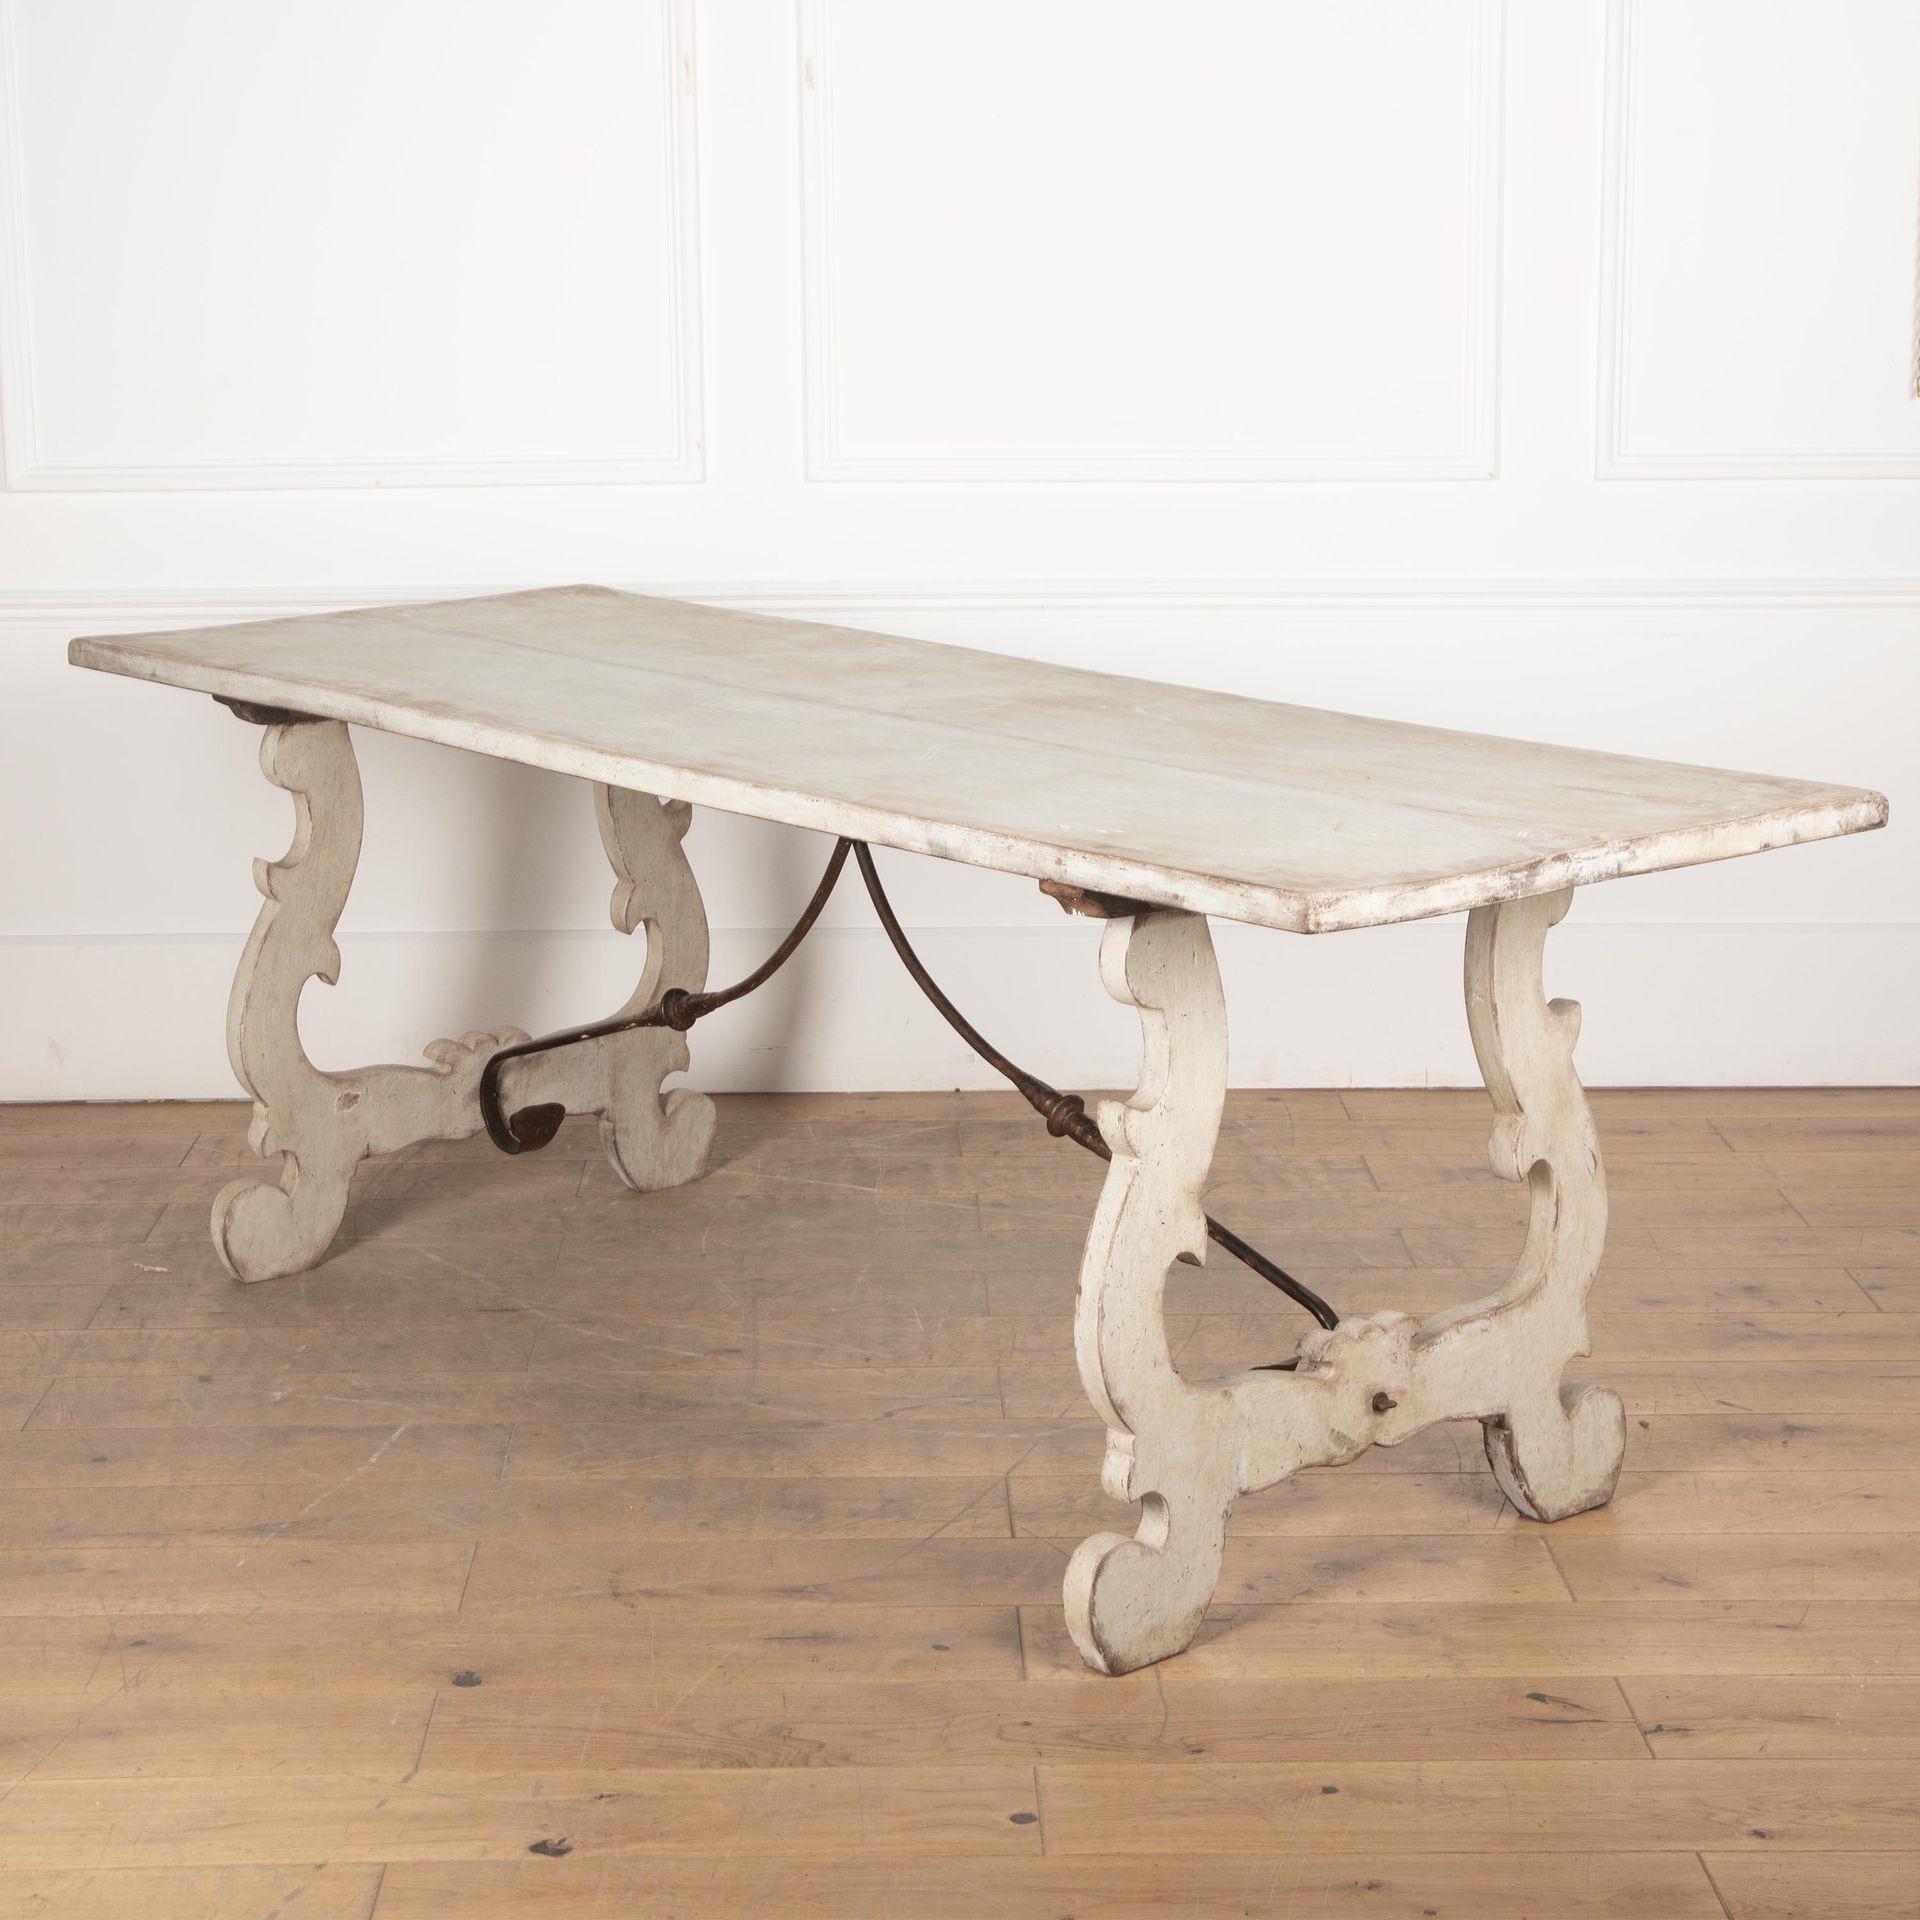 Early 20th century painted dining table with curved legs and wrought iron centre brace.
Circa 1920.